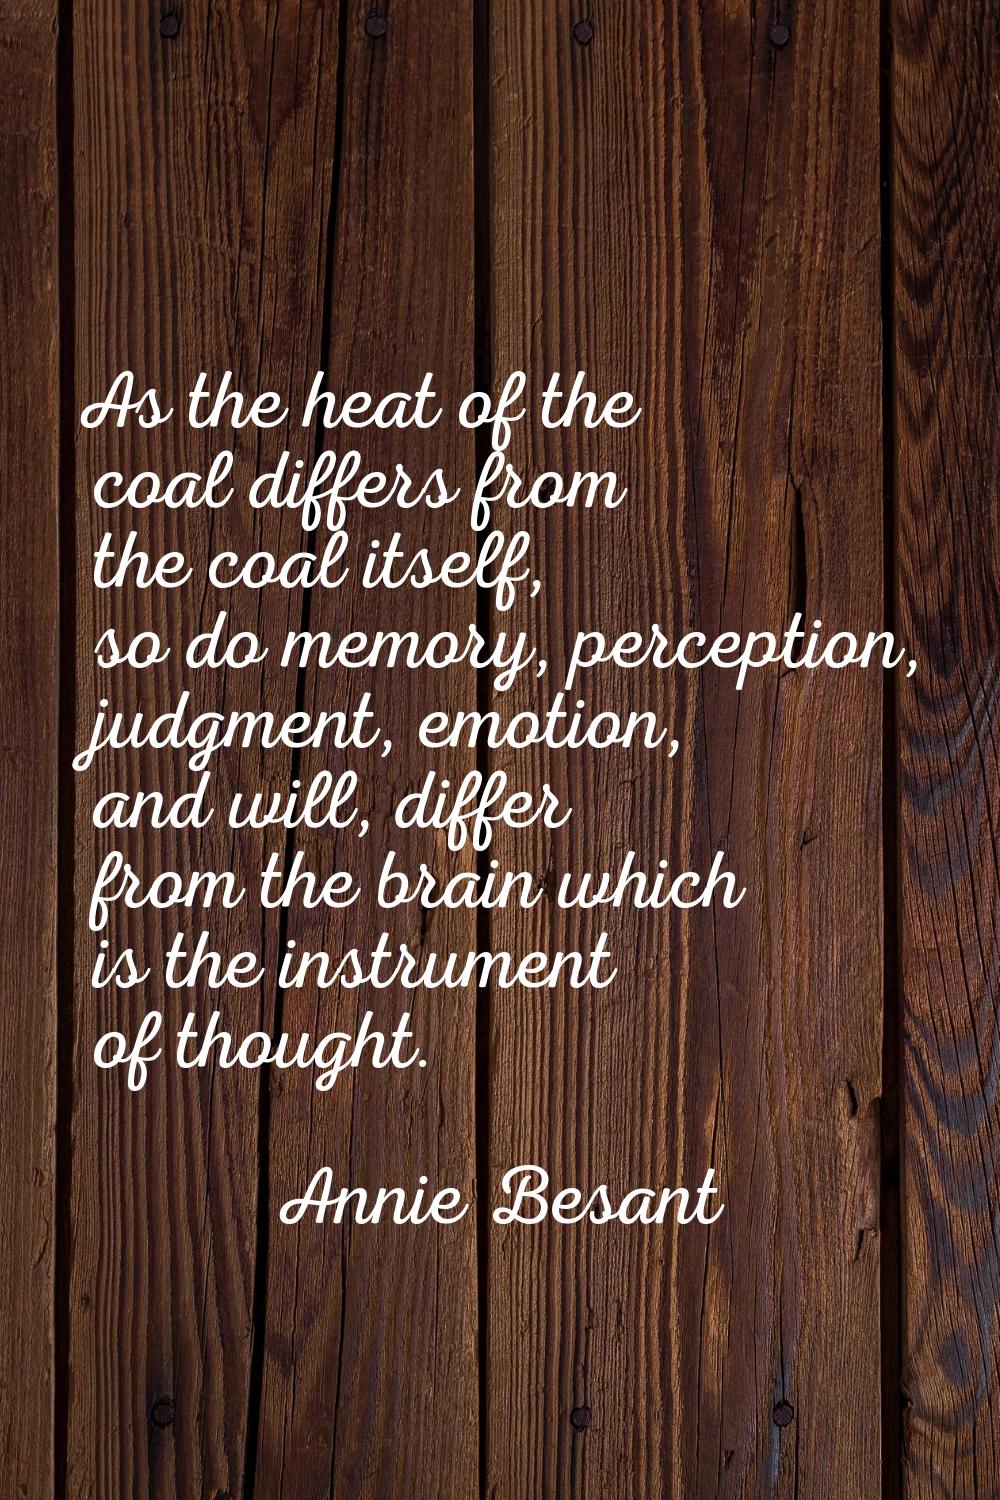 As the heat of the coal differs from the coal itself, so do memory, perception, judgment, emotion, 